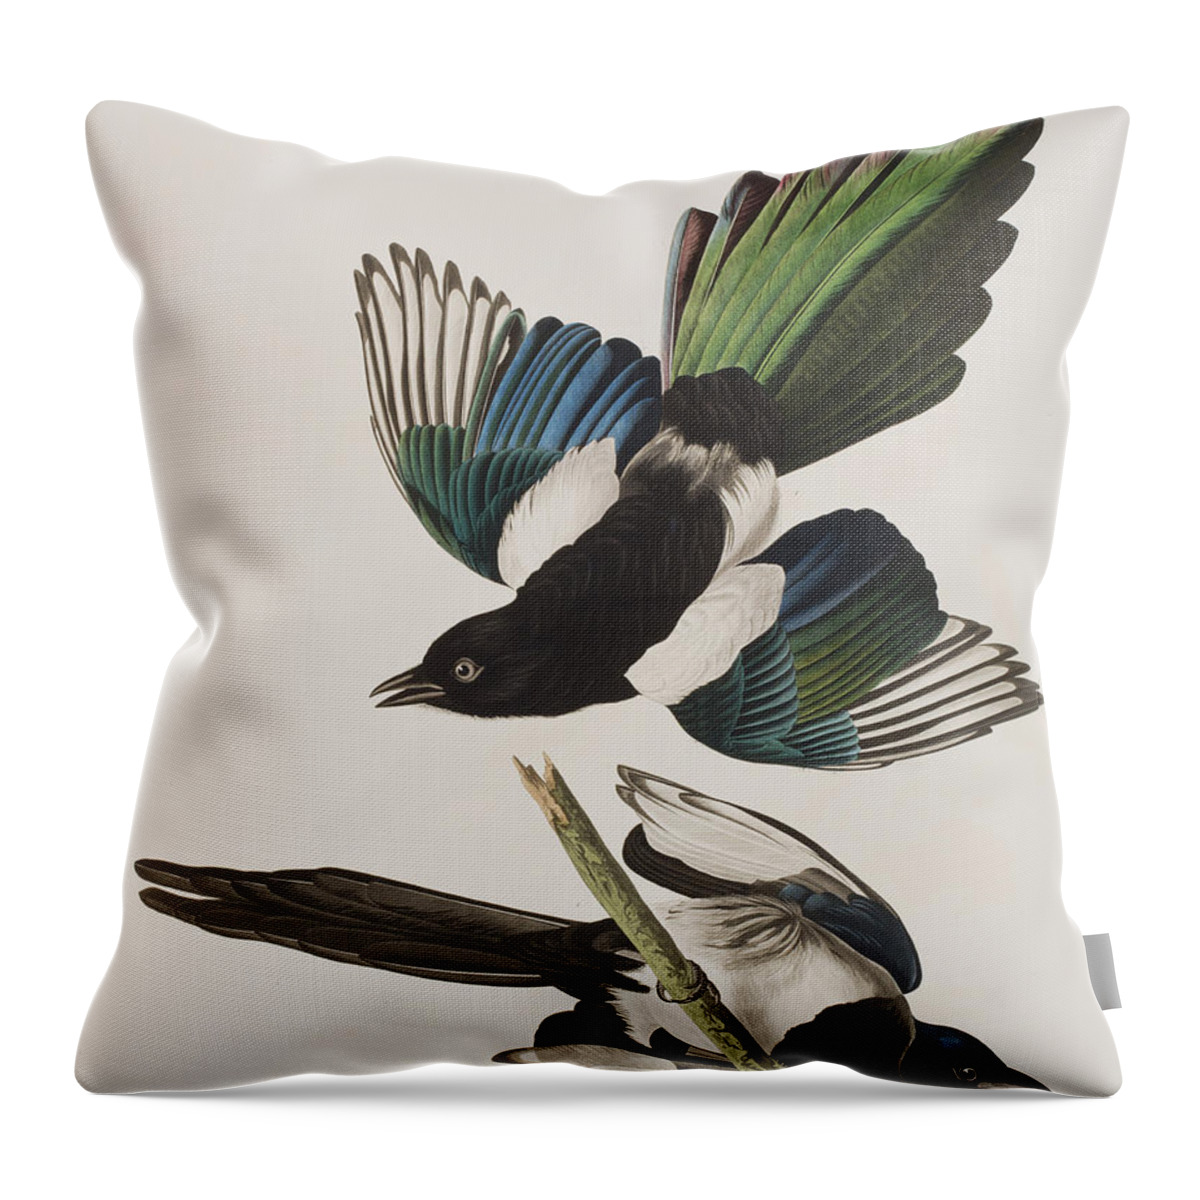 Magpie Throw Pillow featuring the painting American Magpie by John James Audubon